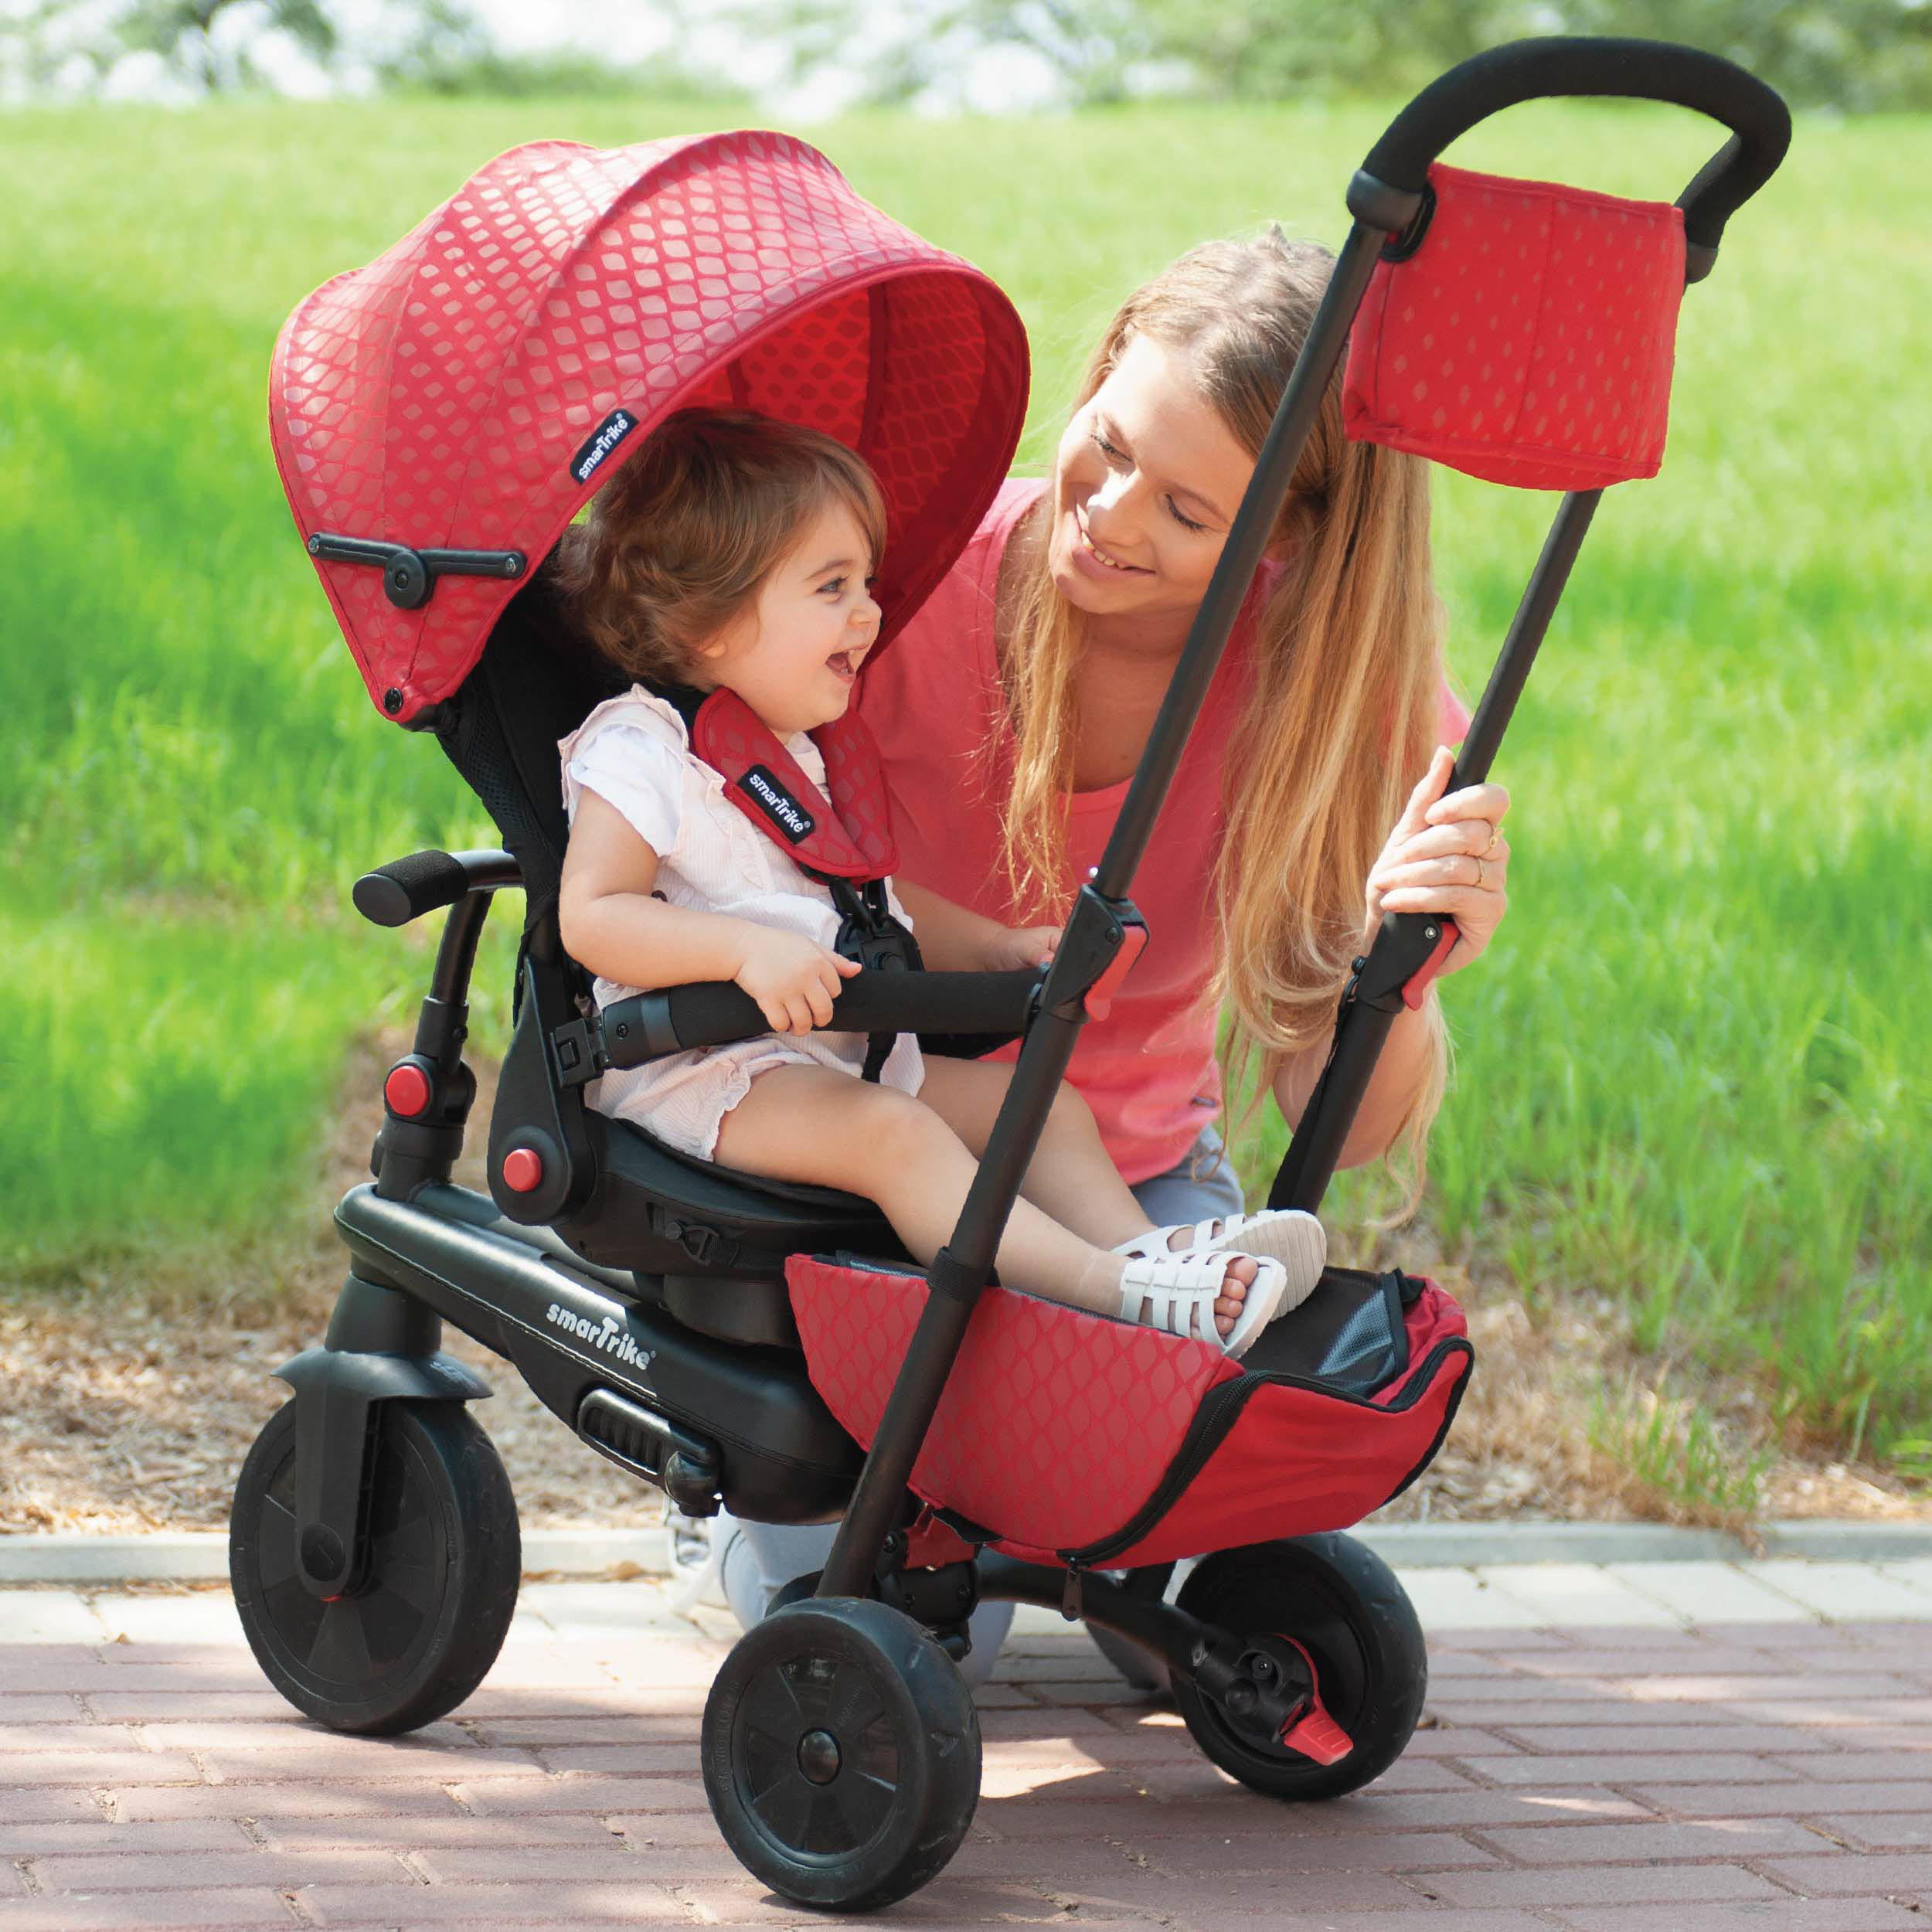 smarTrike smarTfold 700, Folding Baby 8-in-1 Tricycle For 6-36 months  toddler Smart Trike - Red